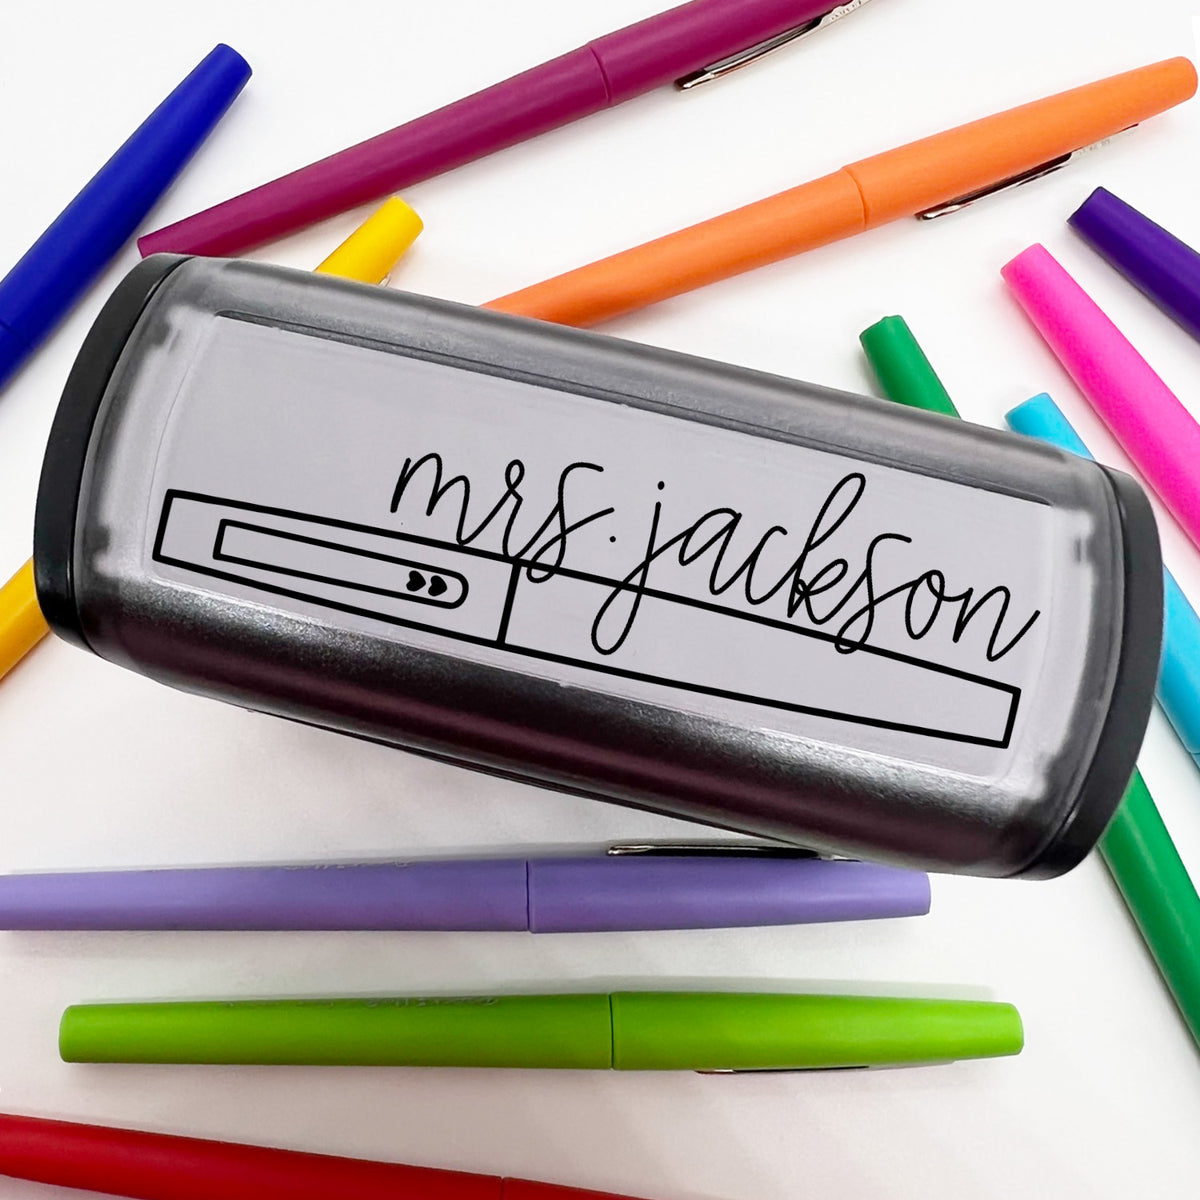 Flair Pen Name Stamp - Red